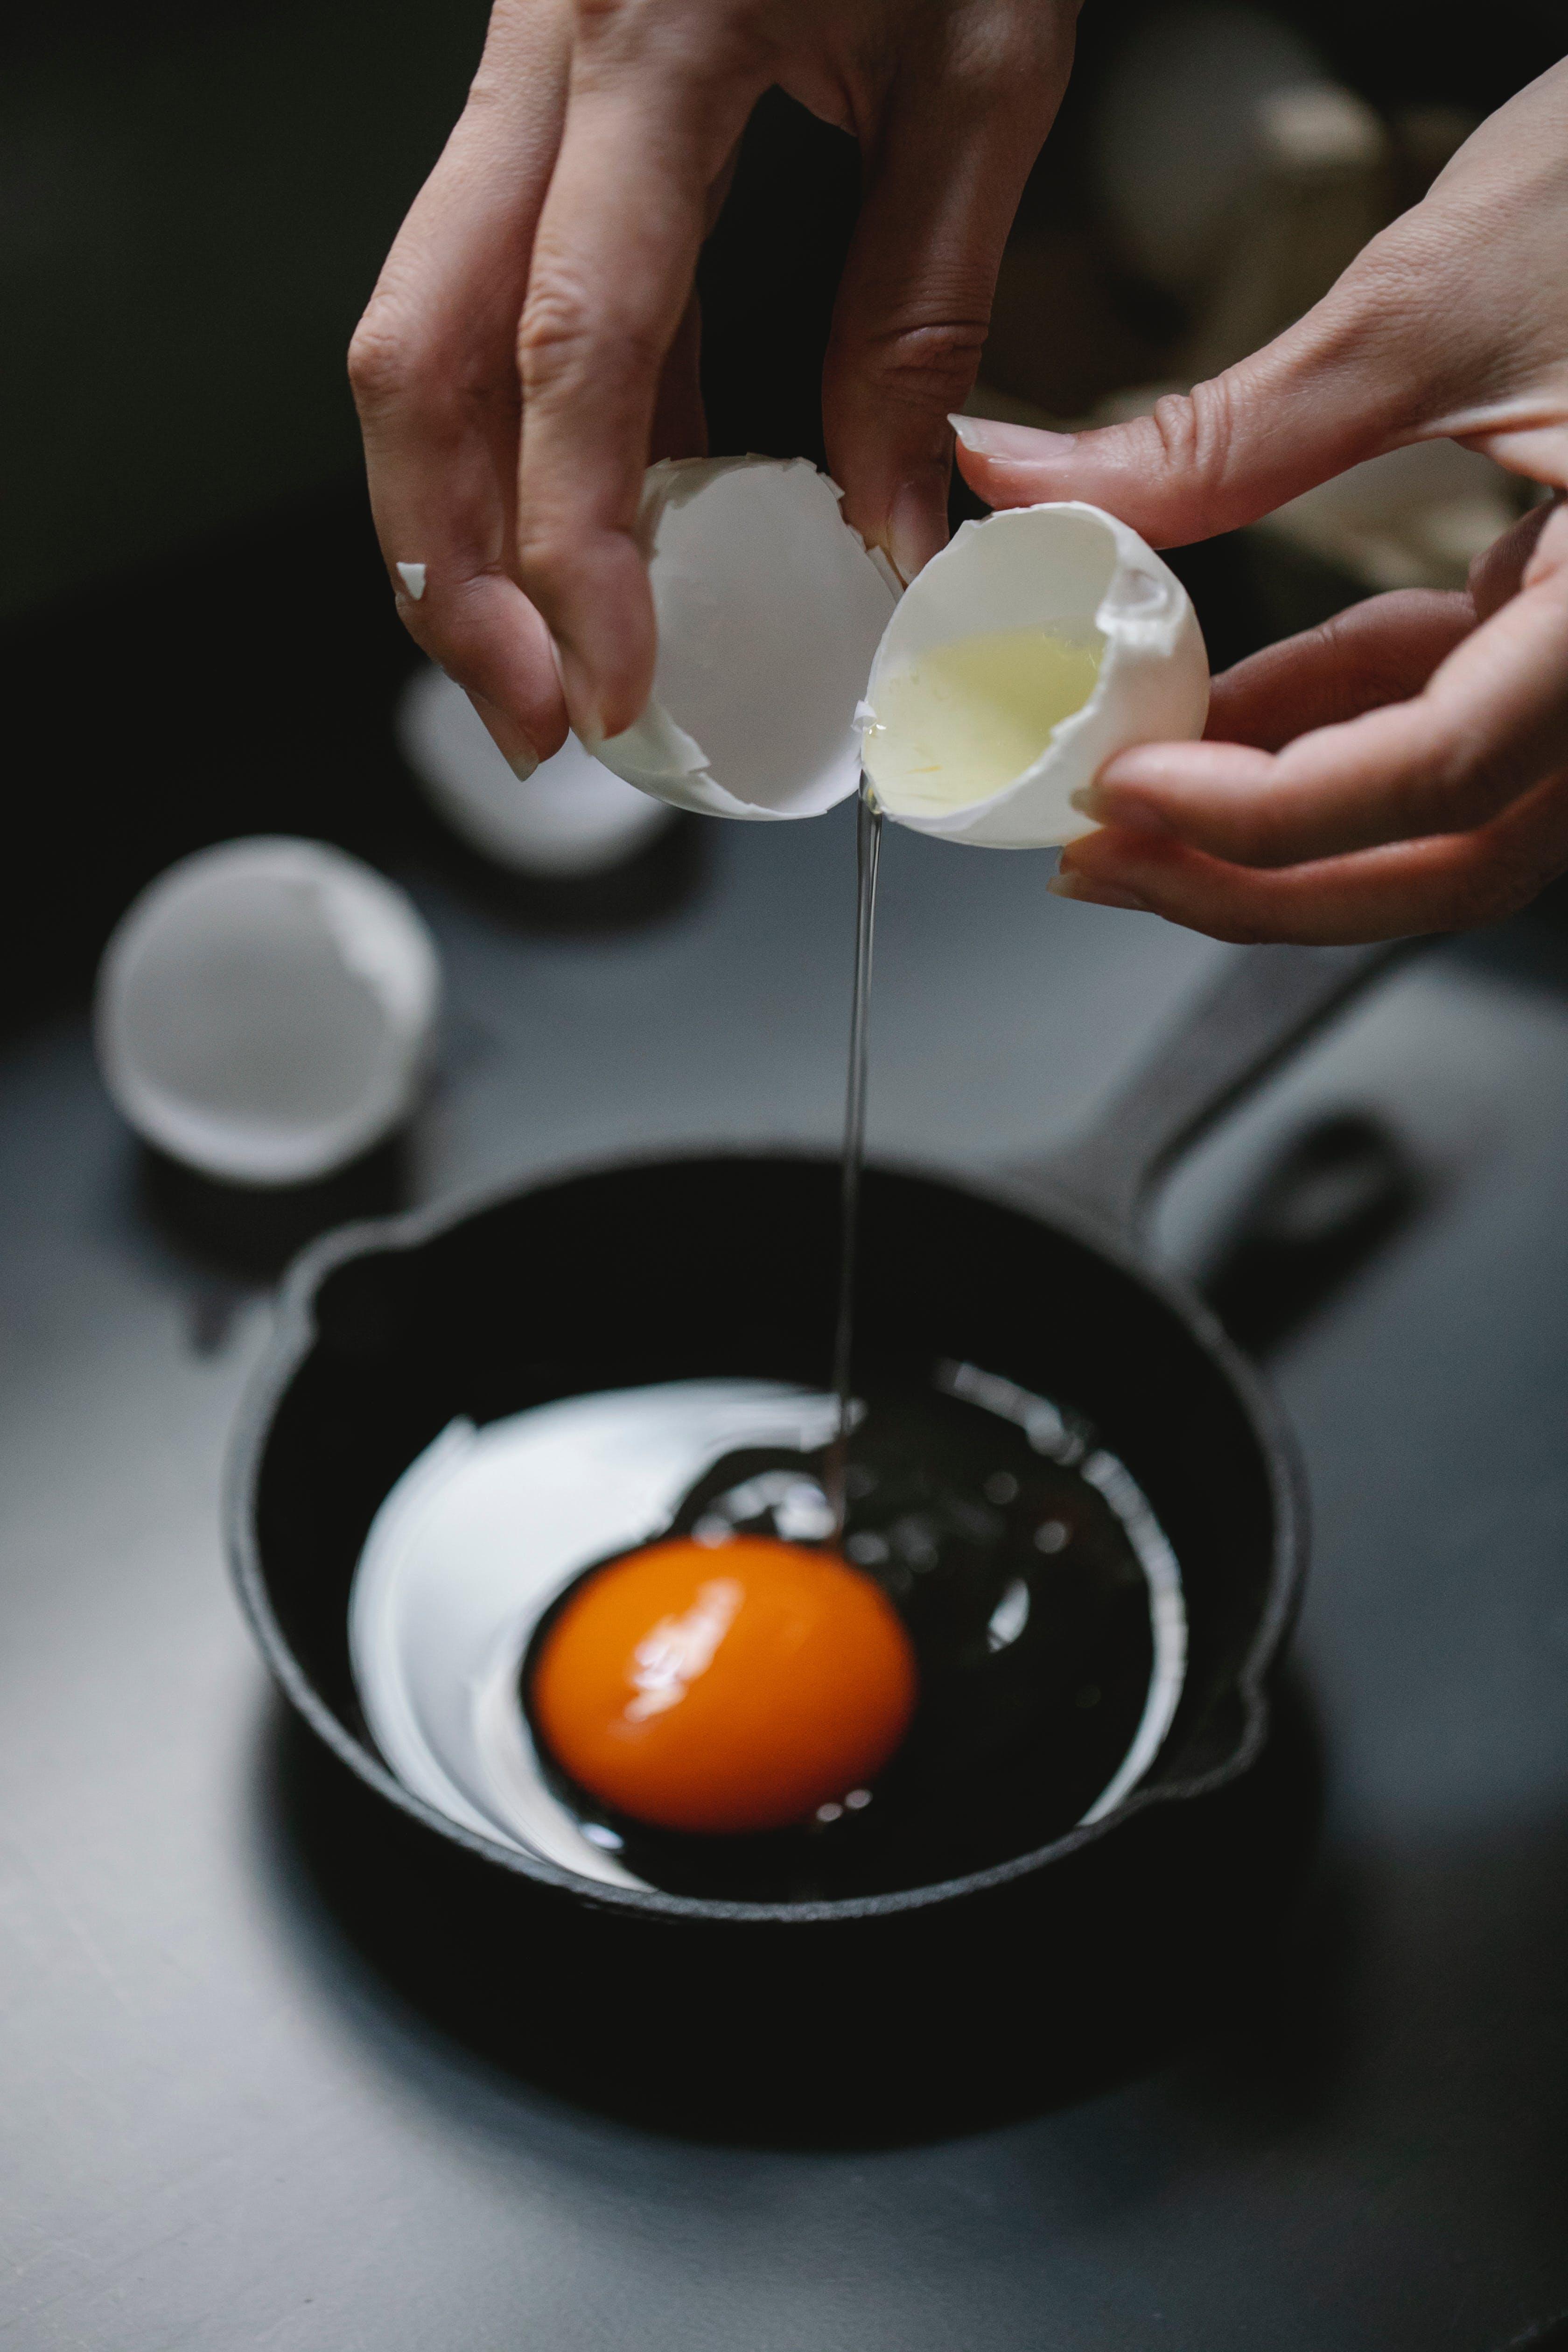 Why is cooking an egg a physical change? 